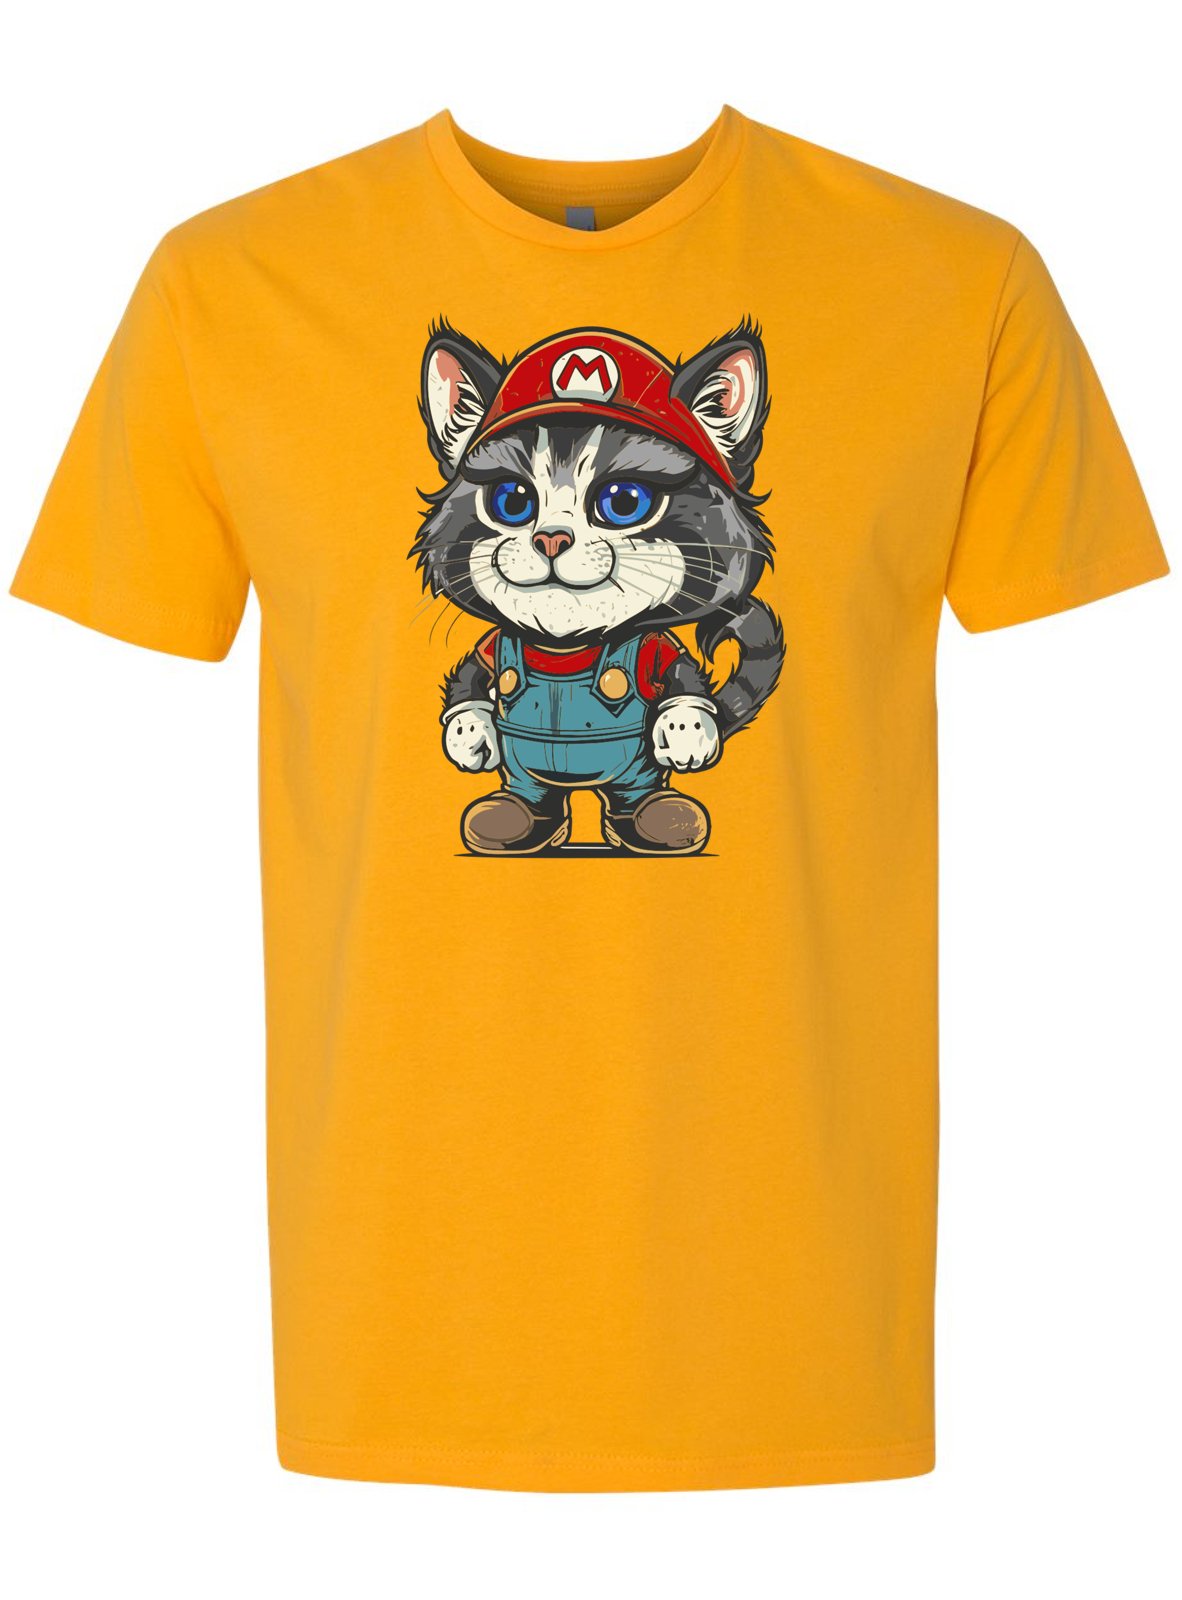 Get Your Cat Inspired Mario Tee - Retro Video Game Style! -